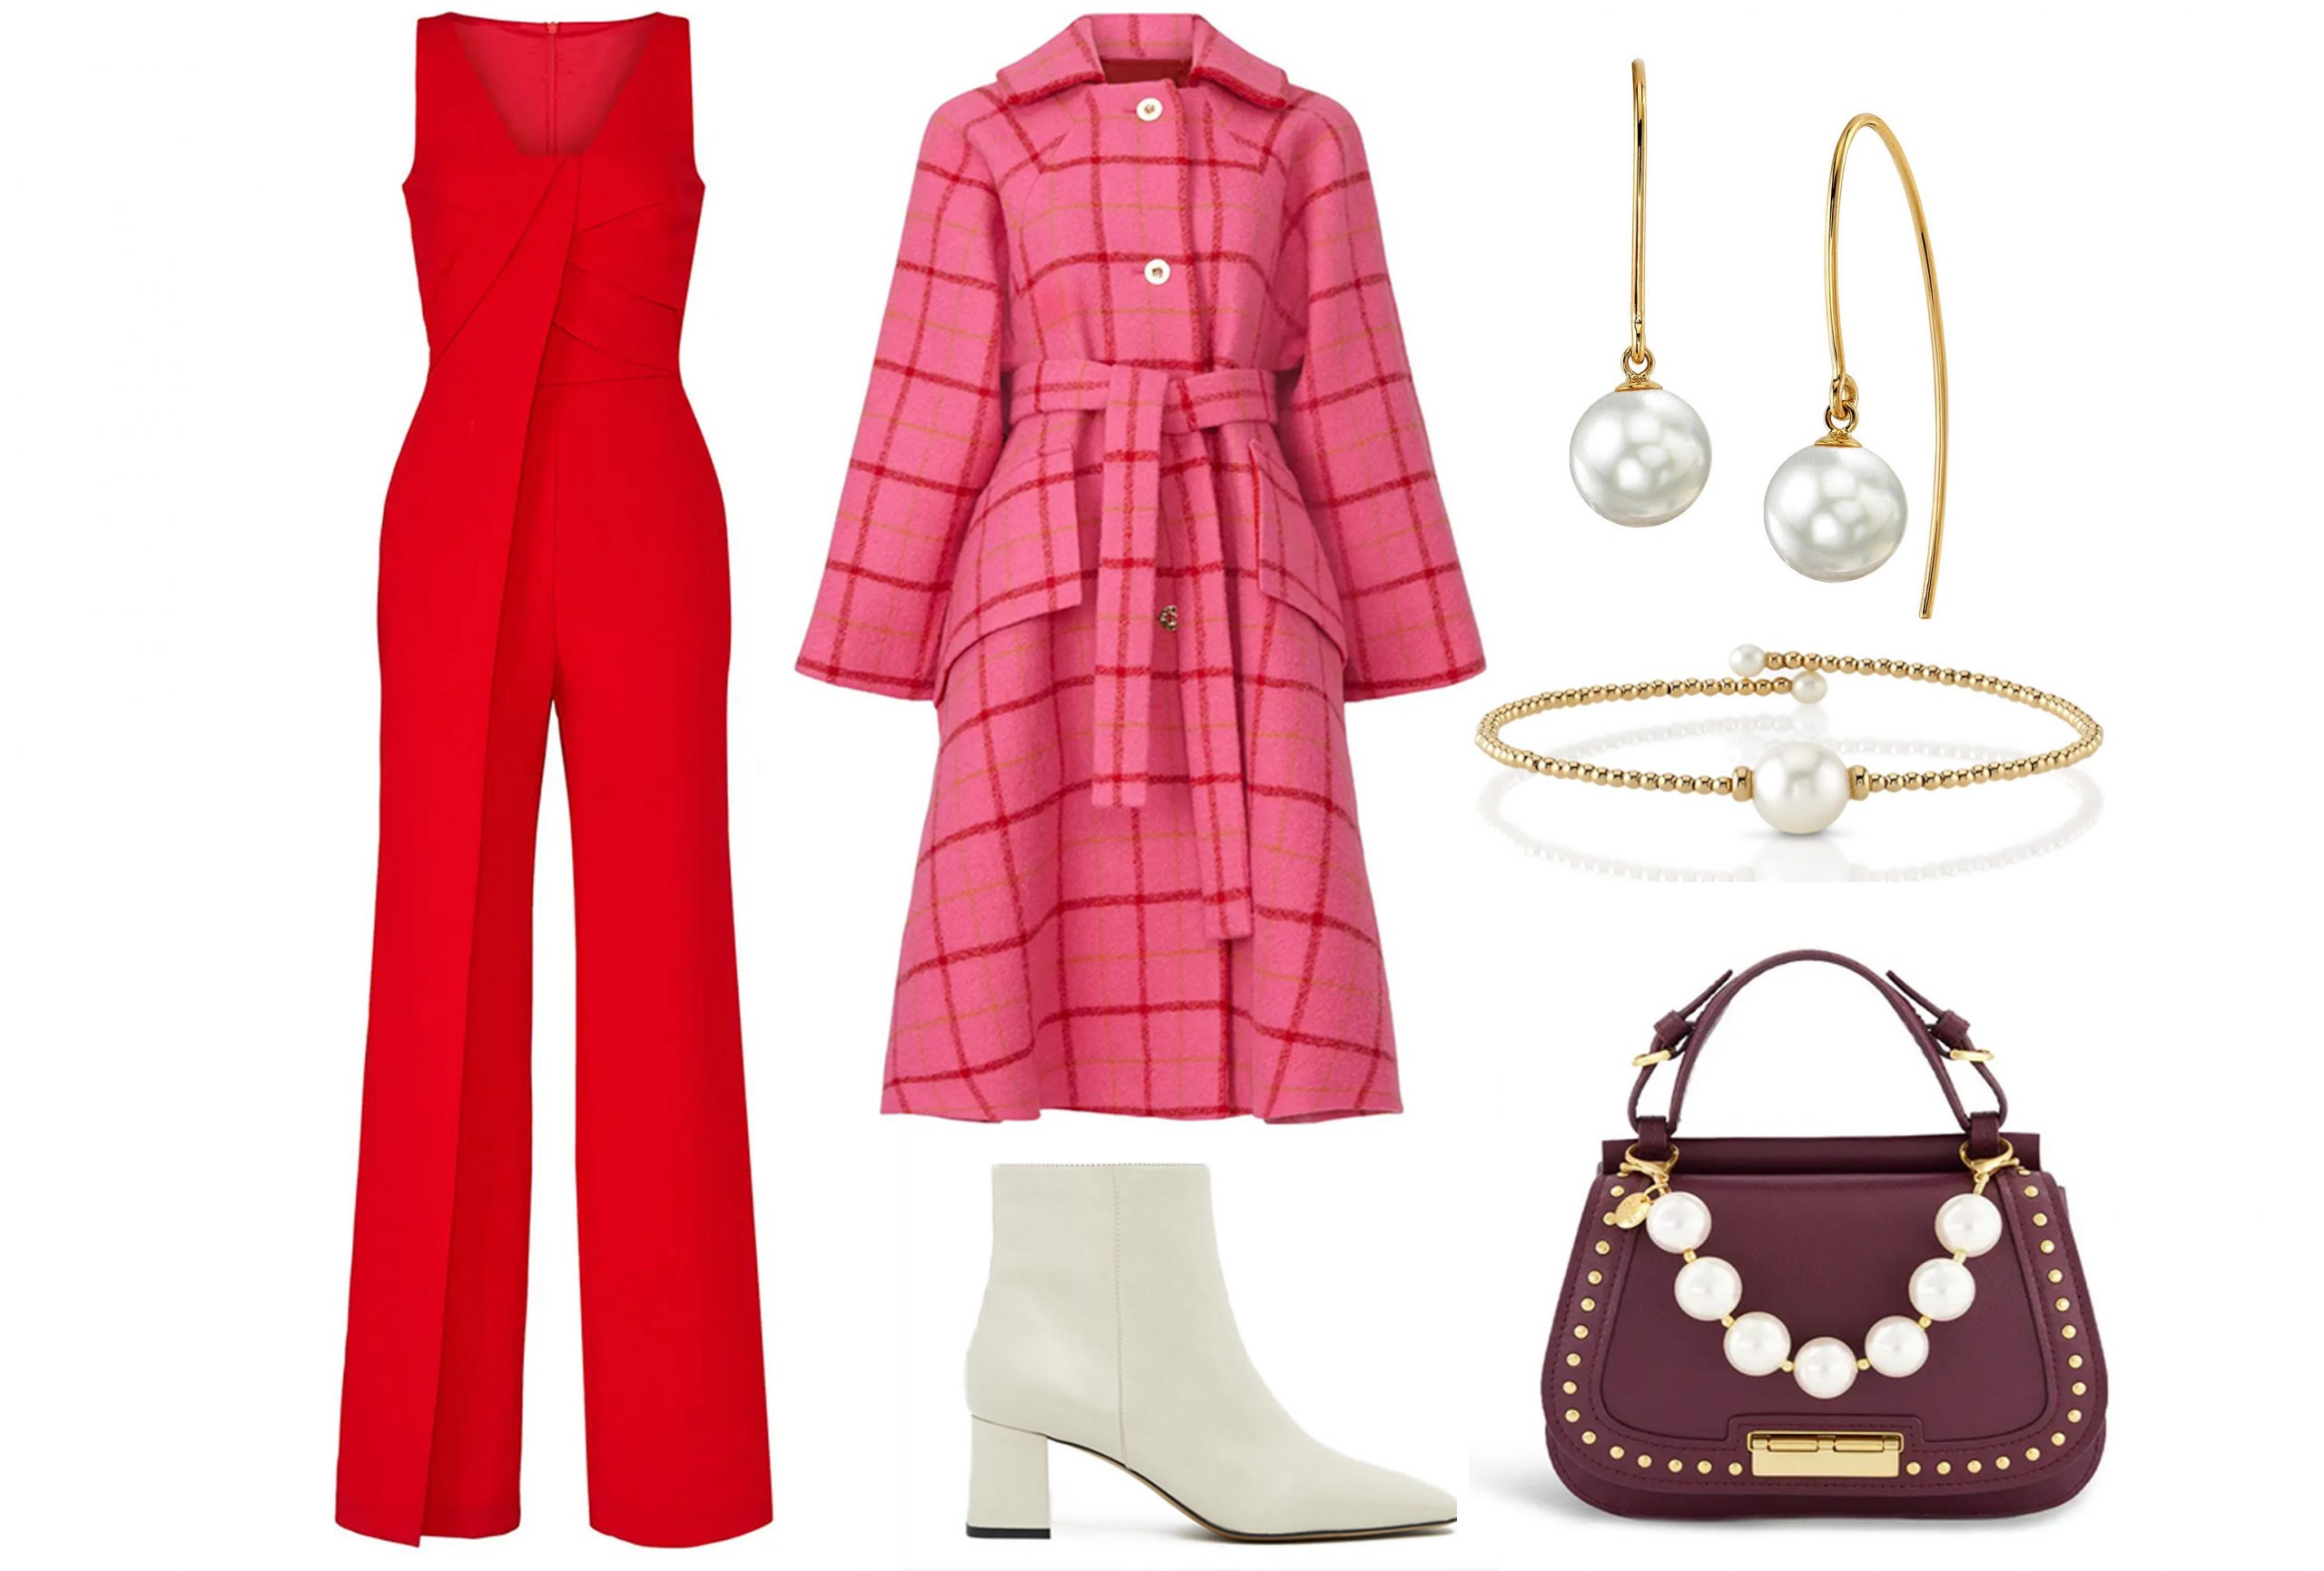 Holiday Pop of Red  Red crossbody bag outfit, Red bag outfit